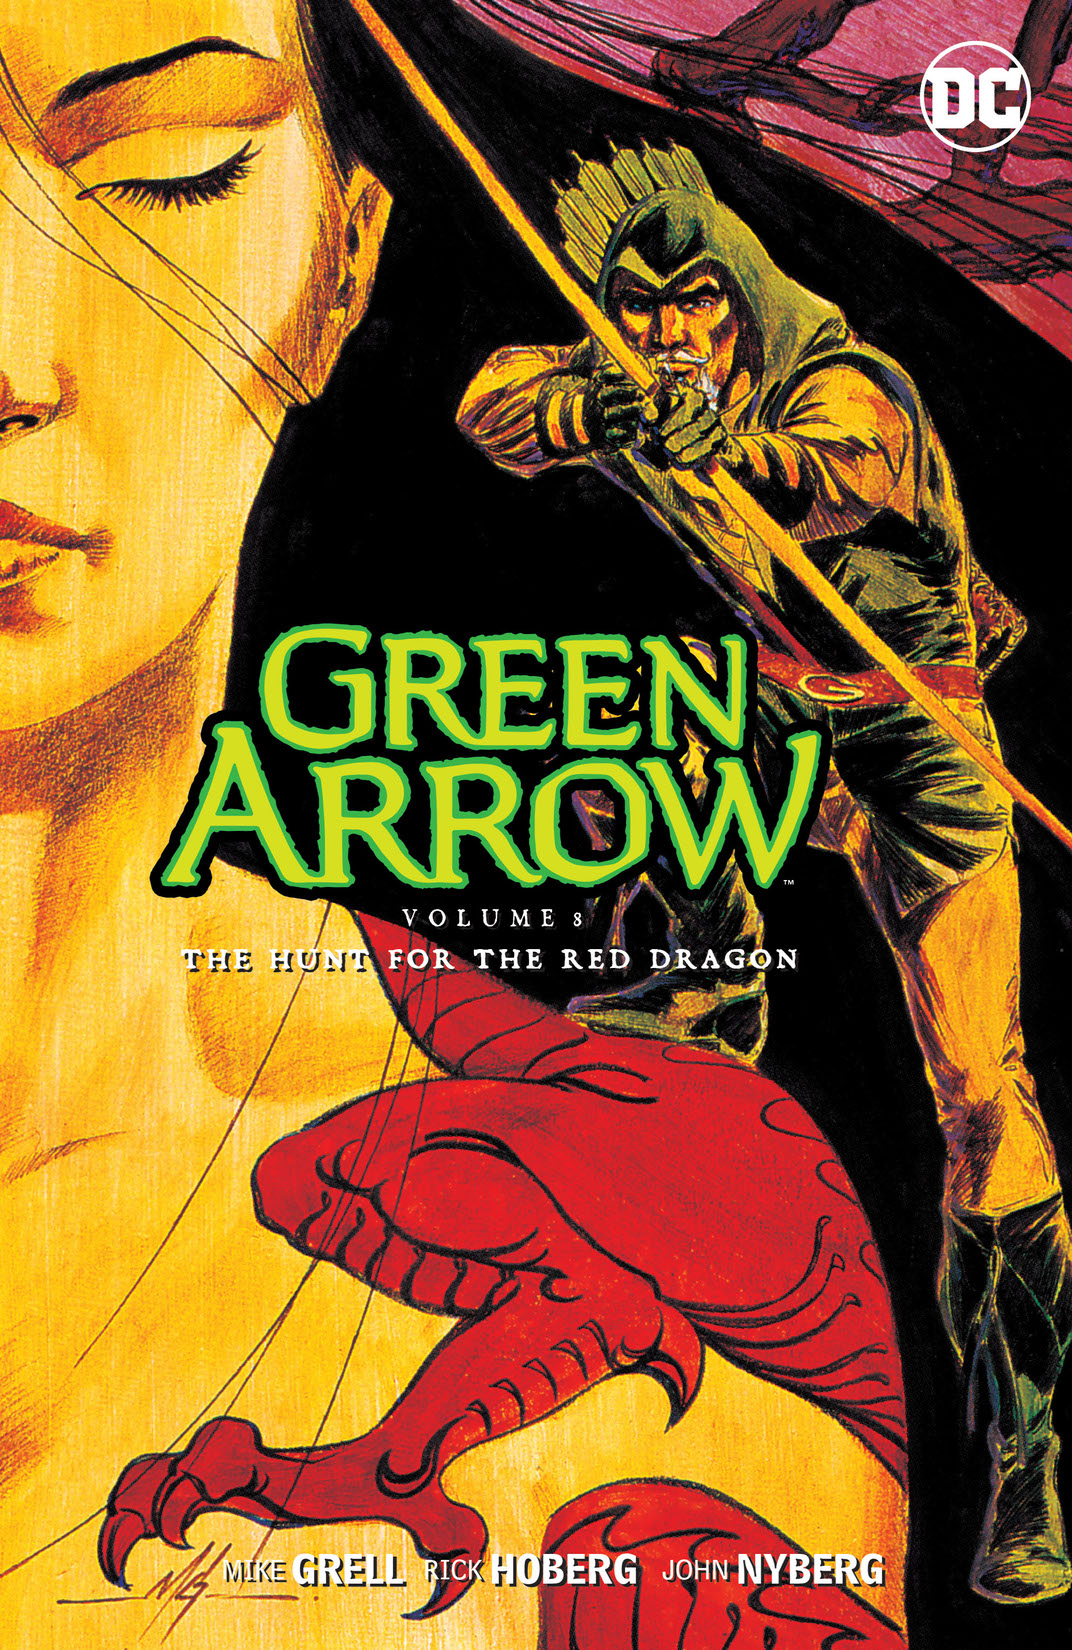 Green Arrow Vol. 8: The Hunt for the Red Dragon preview images